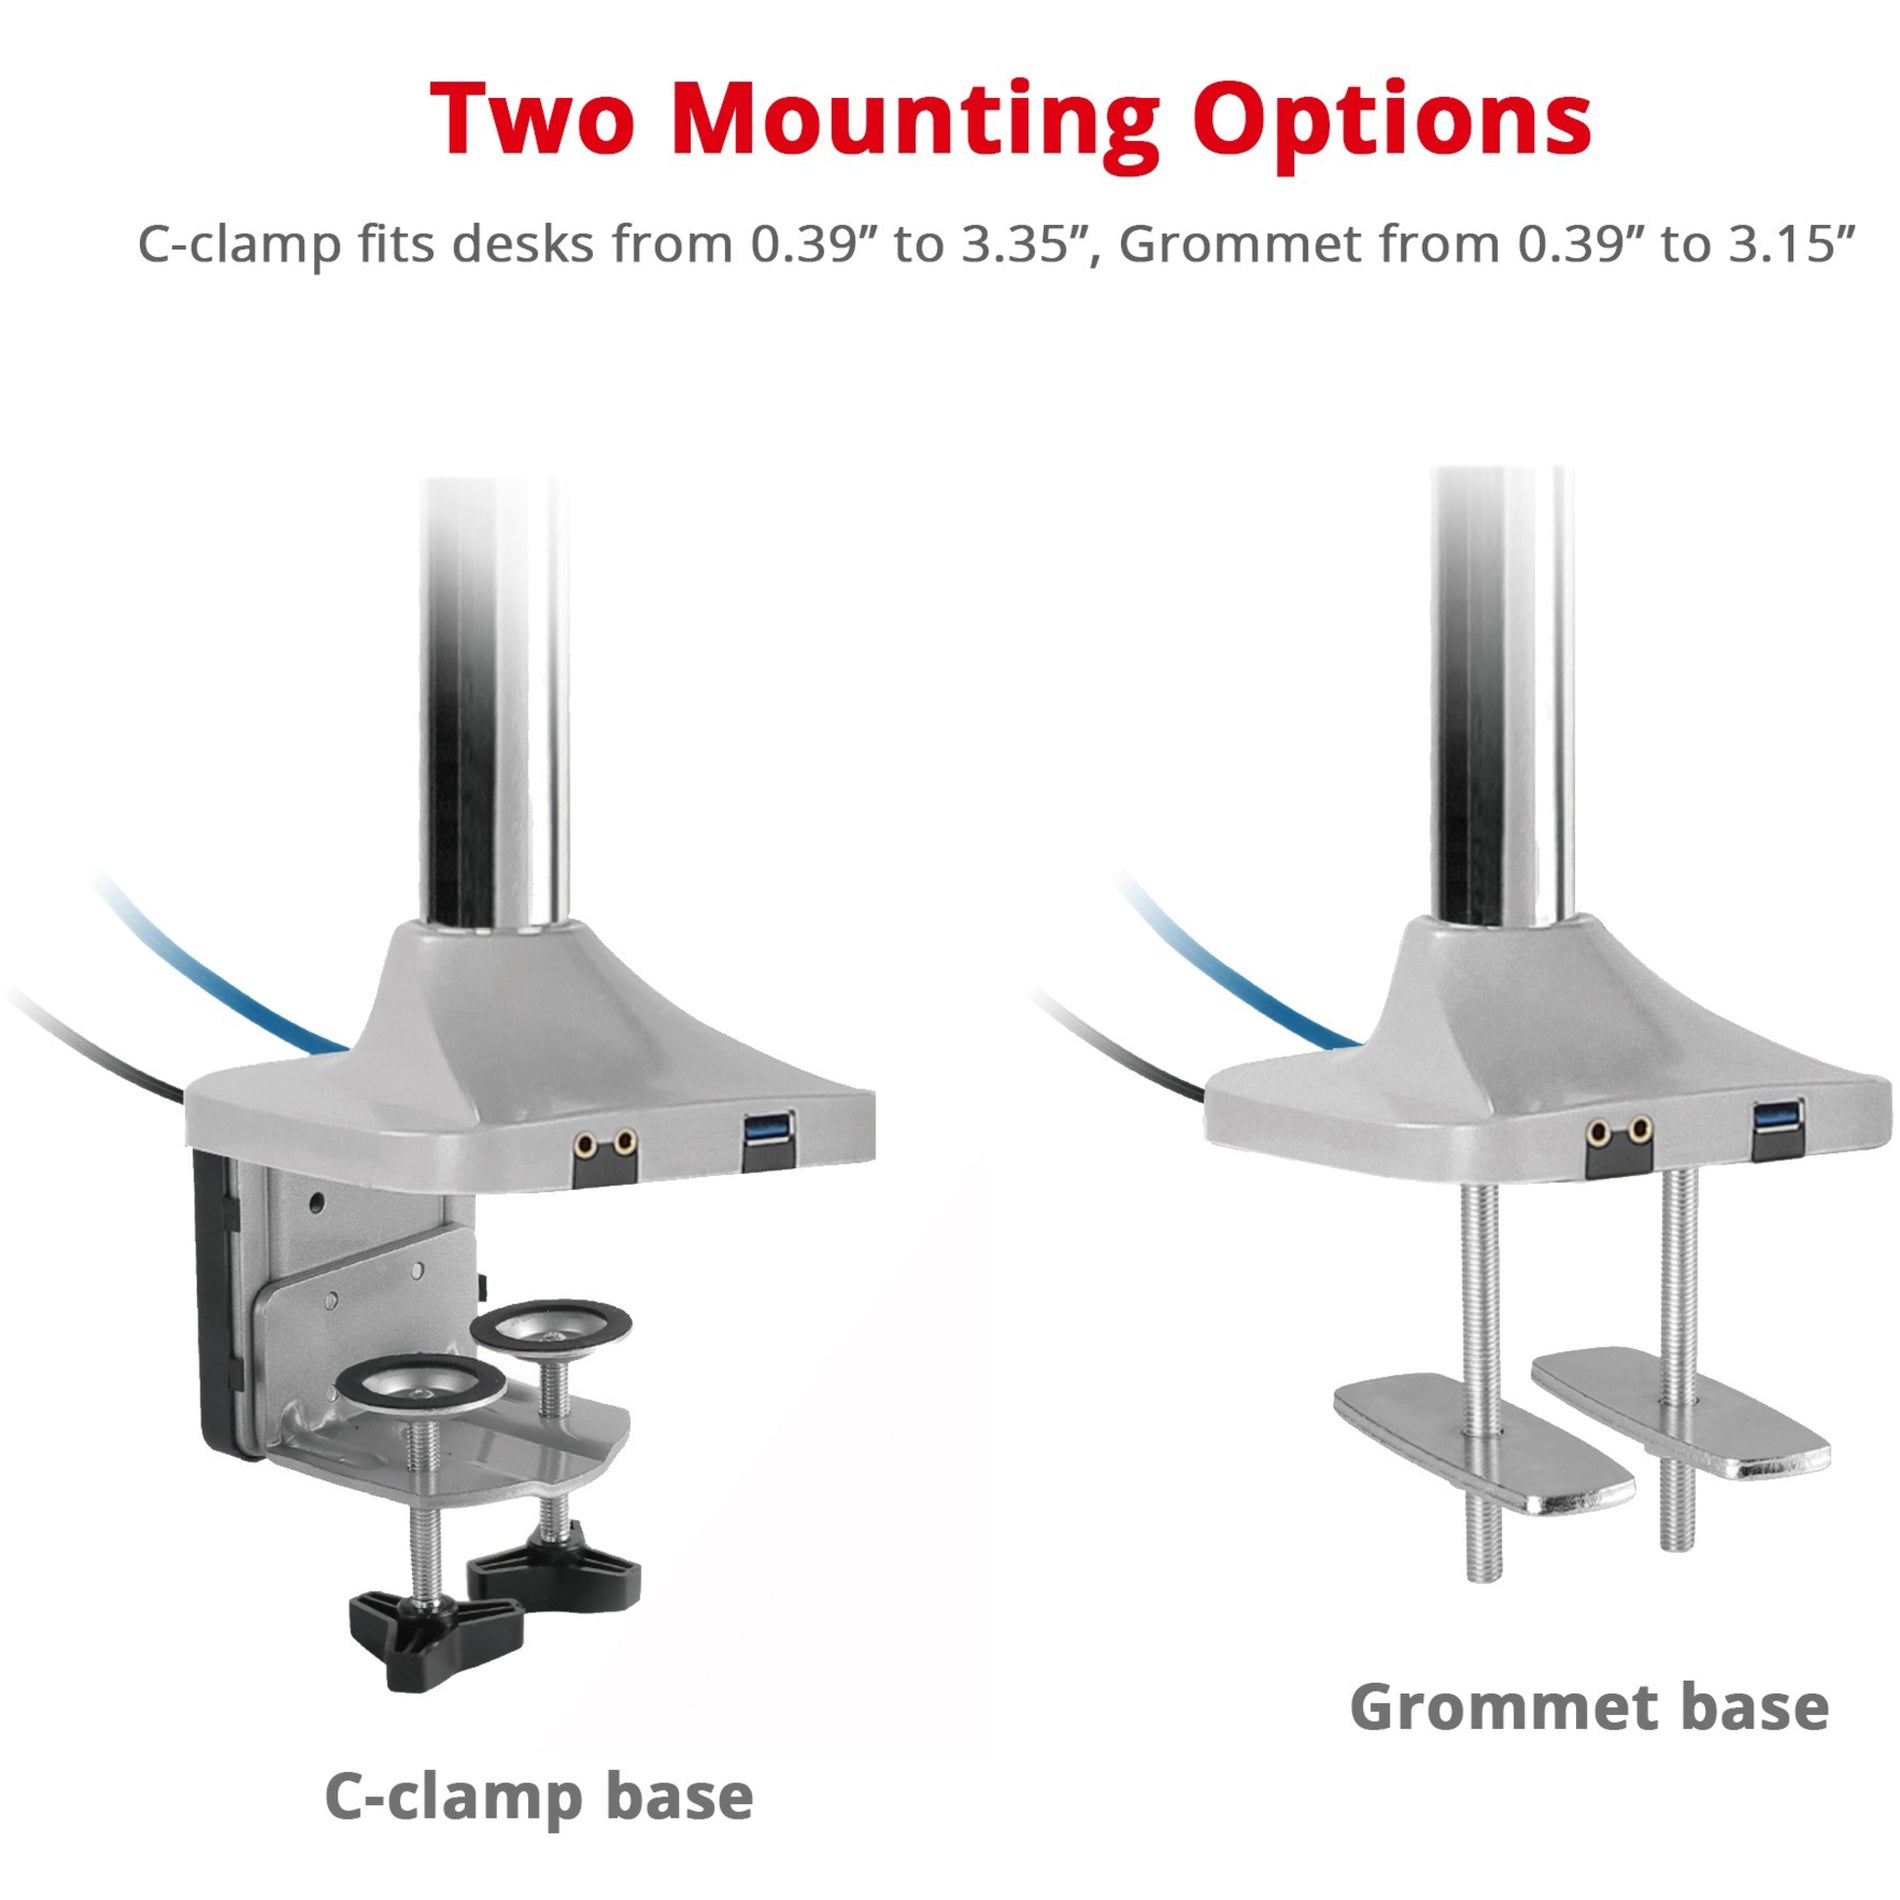 SIIG CE-MT2X11-S1 Dual Monitor Gas Spring Desk Mount with USB Port, Holds 2 Monitors, 39.60 lb Capacity